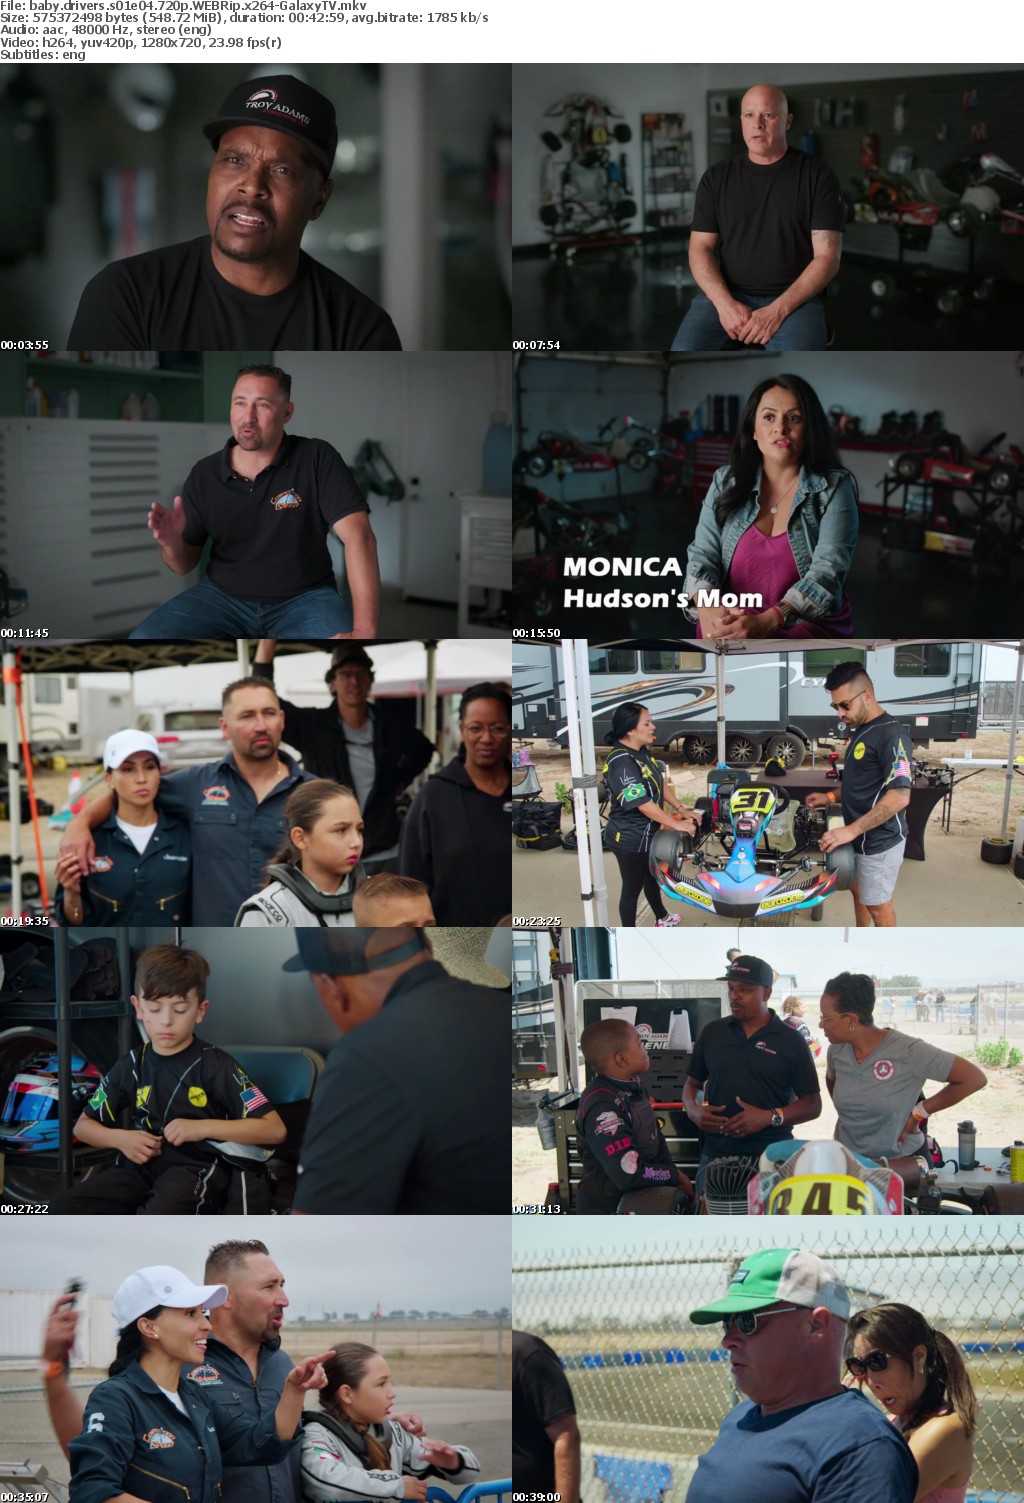 Baby Drivers S01 COMPLETE 720p WEBRip x264-GalaxyTV